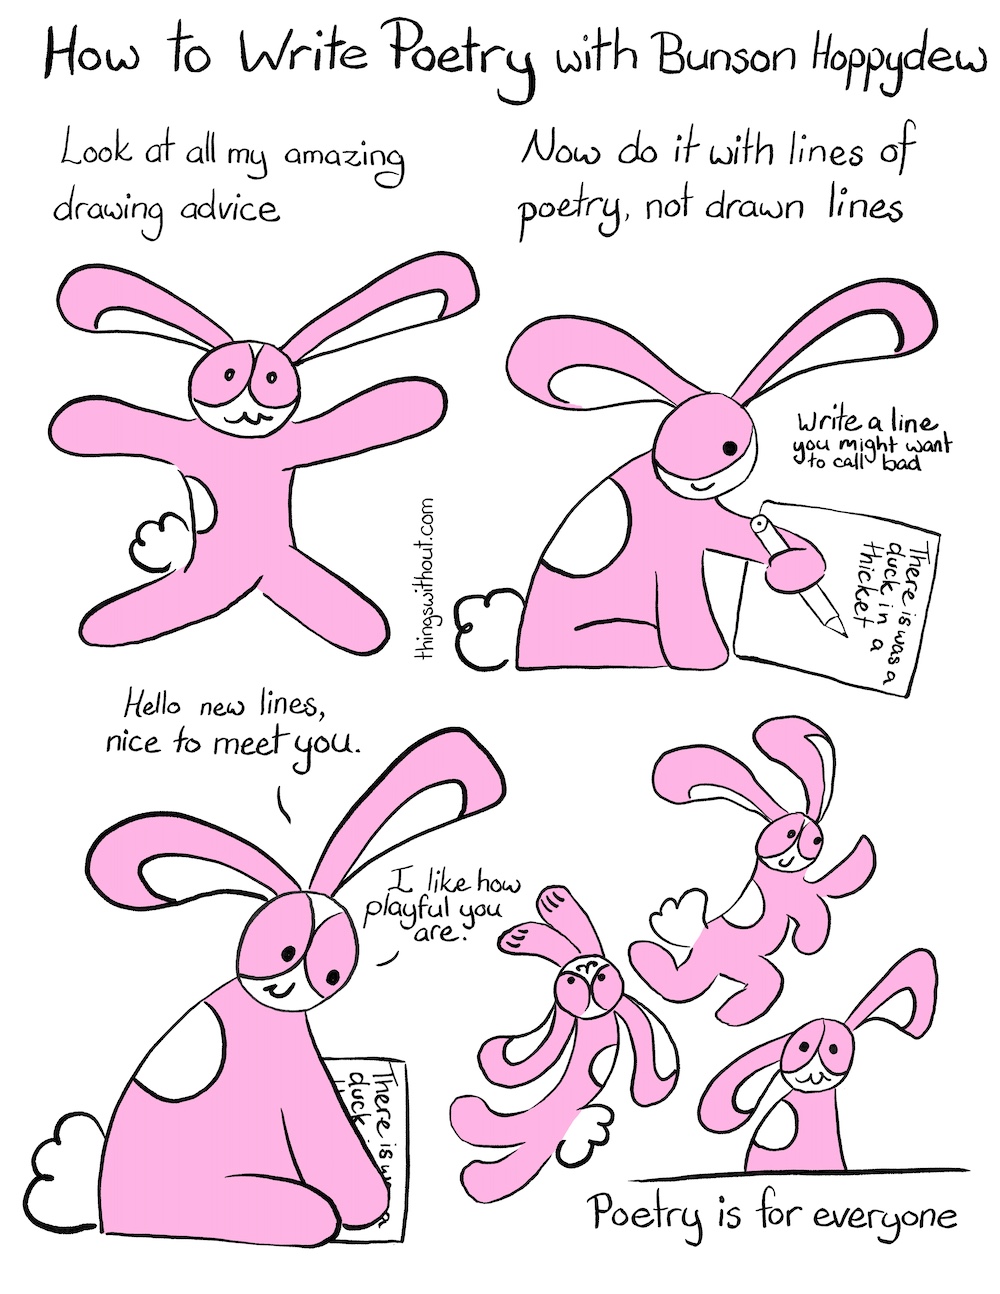 Comic How to Write Poetry with Bunson Hoppydew. Bunson Hoppydew, a pink bunny who likes dancing friendship and cake, is excitedly looking at us. Bunson: Look at all my amazing drawing advice Bunson is sitting down and writing “There is was a duck in a thicket.” Bunson: Now do it with lines of poetry, not drawn lines. Caption: Write a line you might want to call bad. Bunson pats the writing. Bunson: Hello new lines, nice to meet you. Bunson: I like how playful you are. Bunson dancing and spoinging through the air. Bunson sits down and smiles. Caption: Poetry is for everyone.